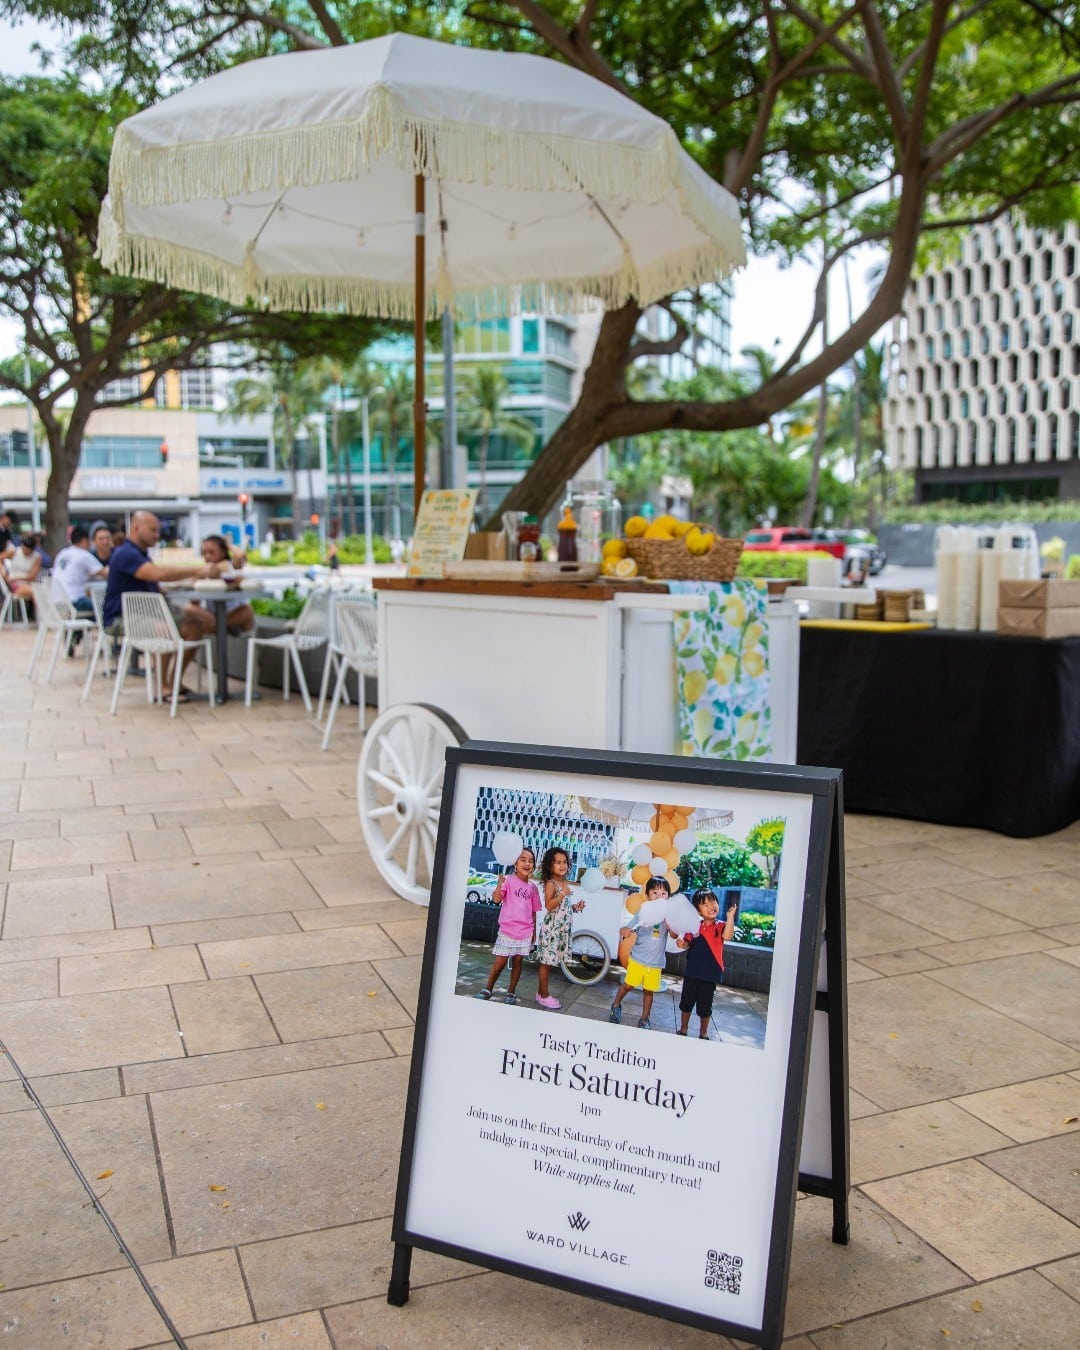 Join us for our next First Saturday Celebration on June 3 starting at 1pm featuring JINYA Ramen Bar’s Shaka Ramen and a hands-on First Saturday Workshop hosted by Creations of Hawaiʻi, while supplies last.